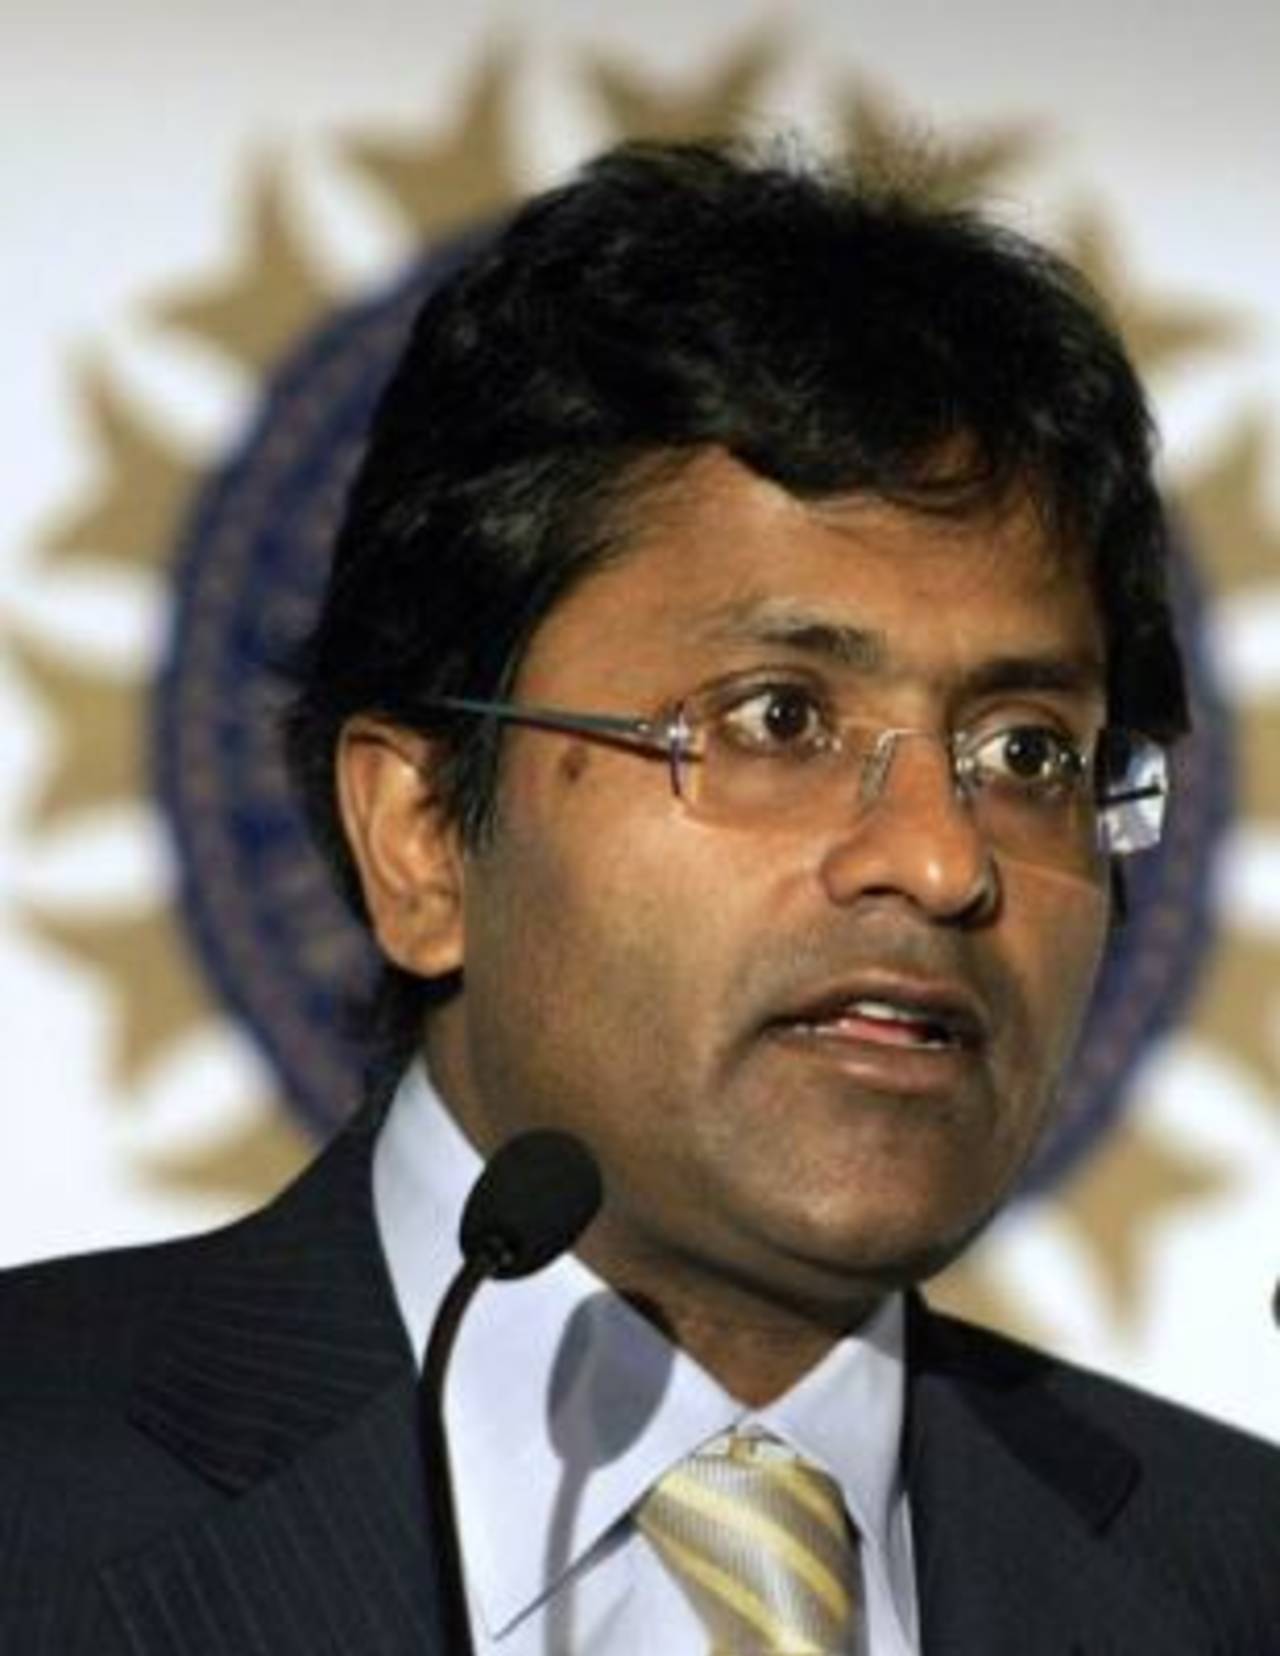 Lalit Modi could wind up facing civil or criminal charges as a result of the BCCI's investigation into the allegations against him&nbsp;&nbsp;&bull;&nbsp;&nbsp;Associated Press